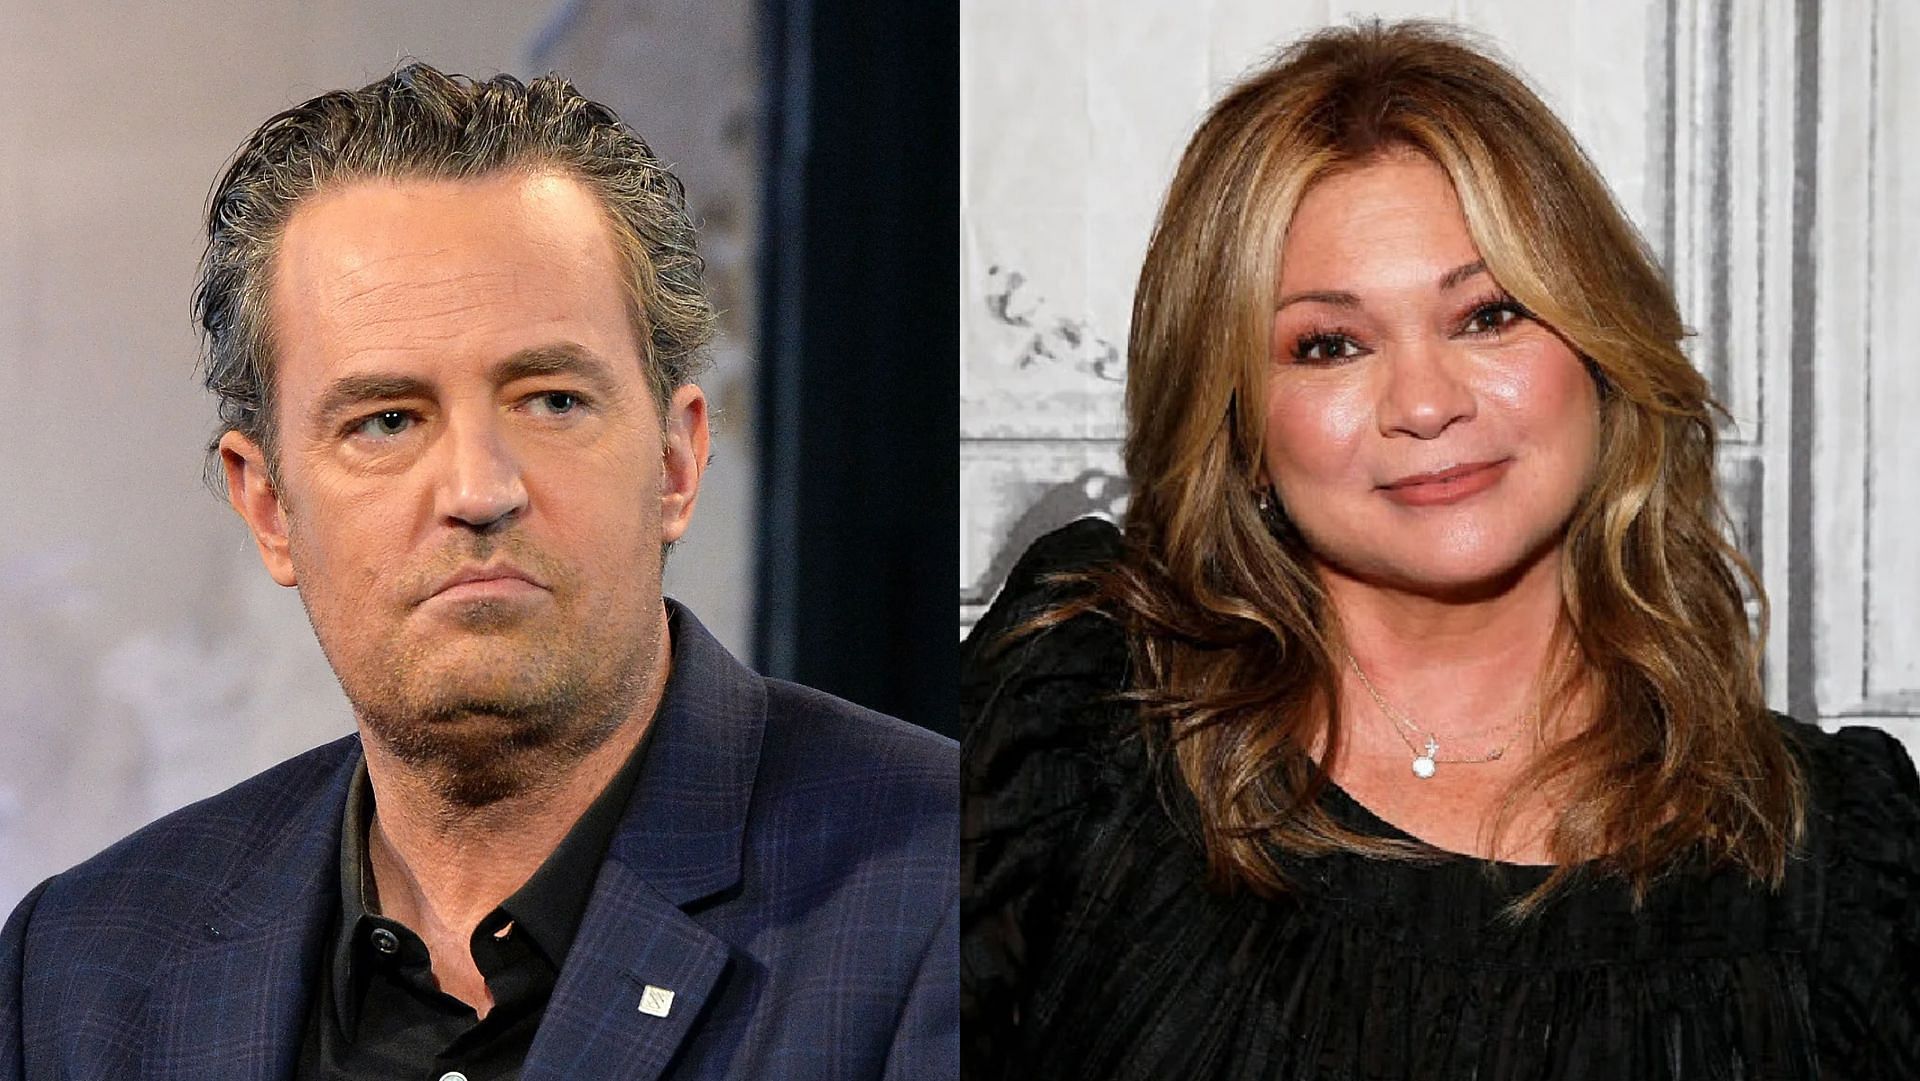 Valerie Bertinelli and Matthew Perry starred in short-lived series, Sydney. (Image via Slaven Vlasic/Getty Images, Dominik Bindl/Getty Images)